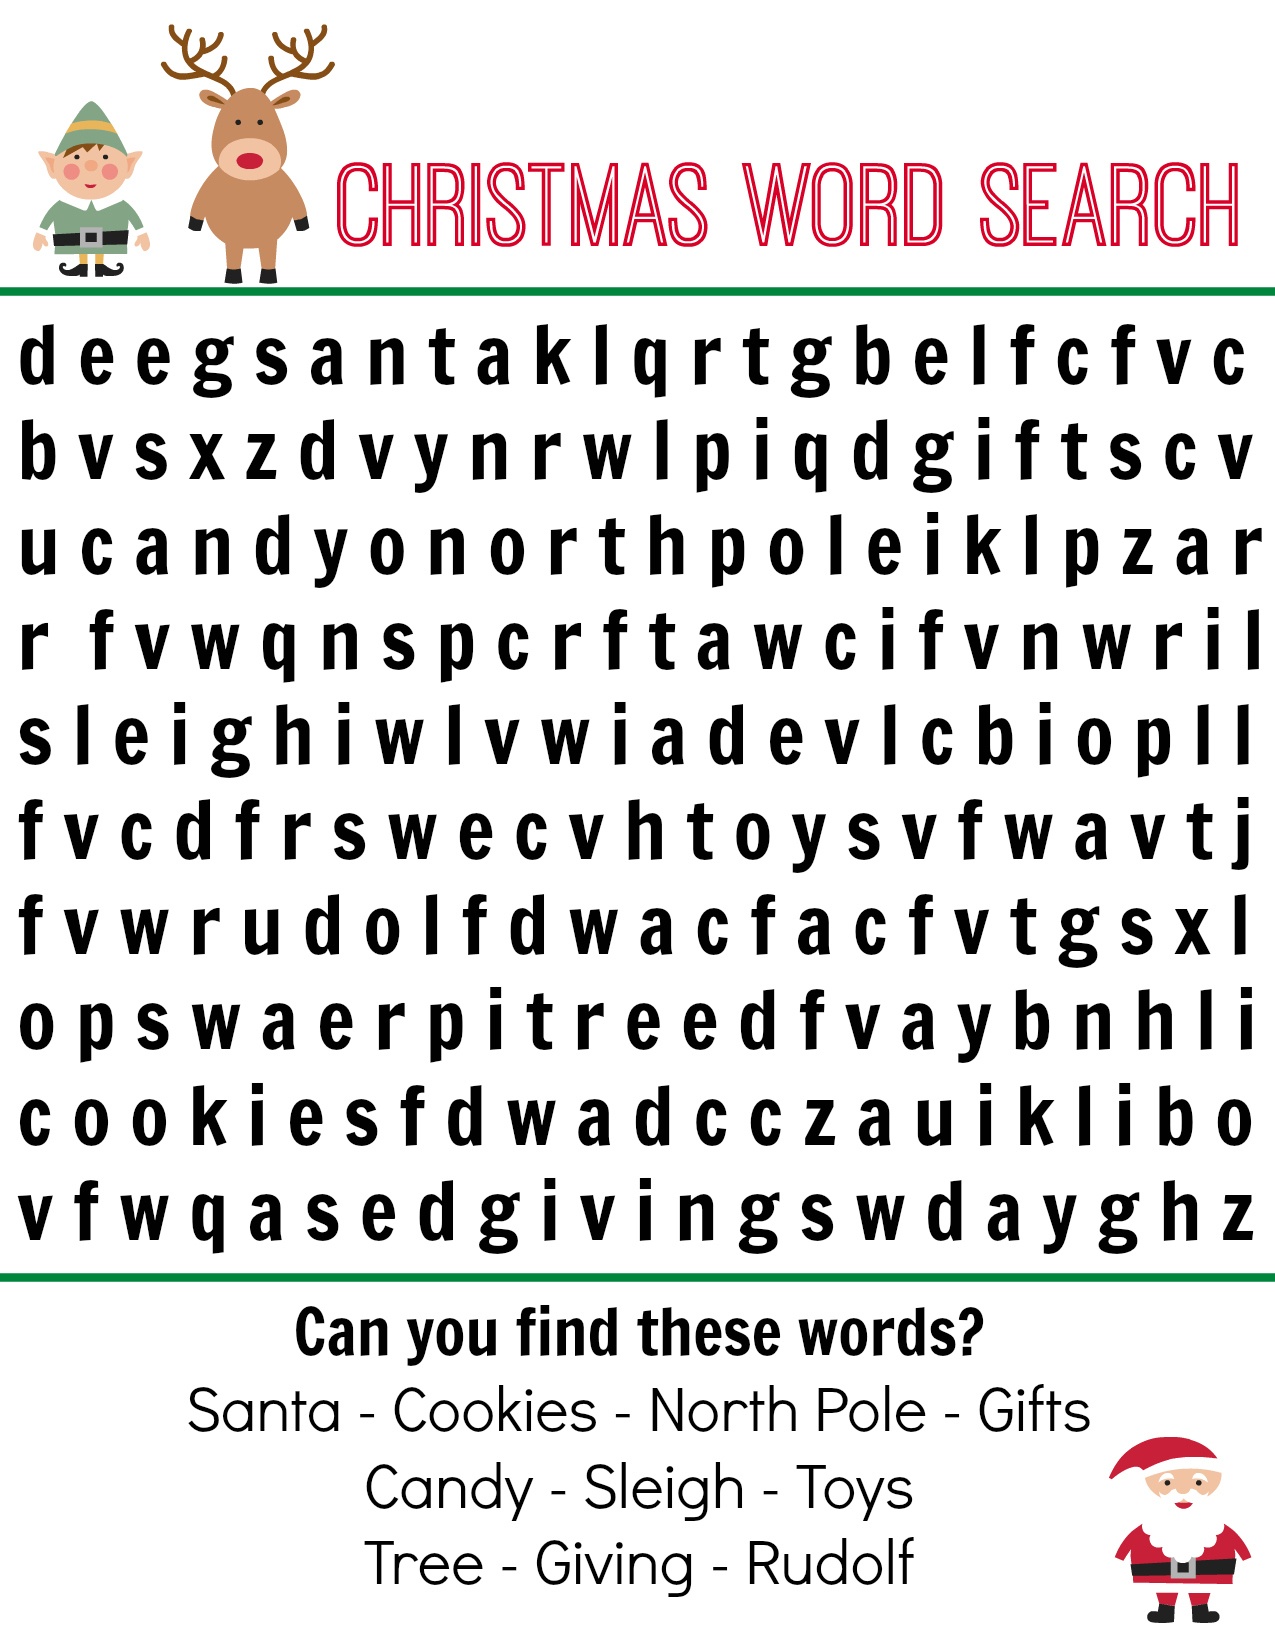 Christmas Word Search Free Printable - No Time For Flash Cards - Christmas Find A Word Printable Free